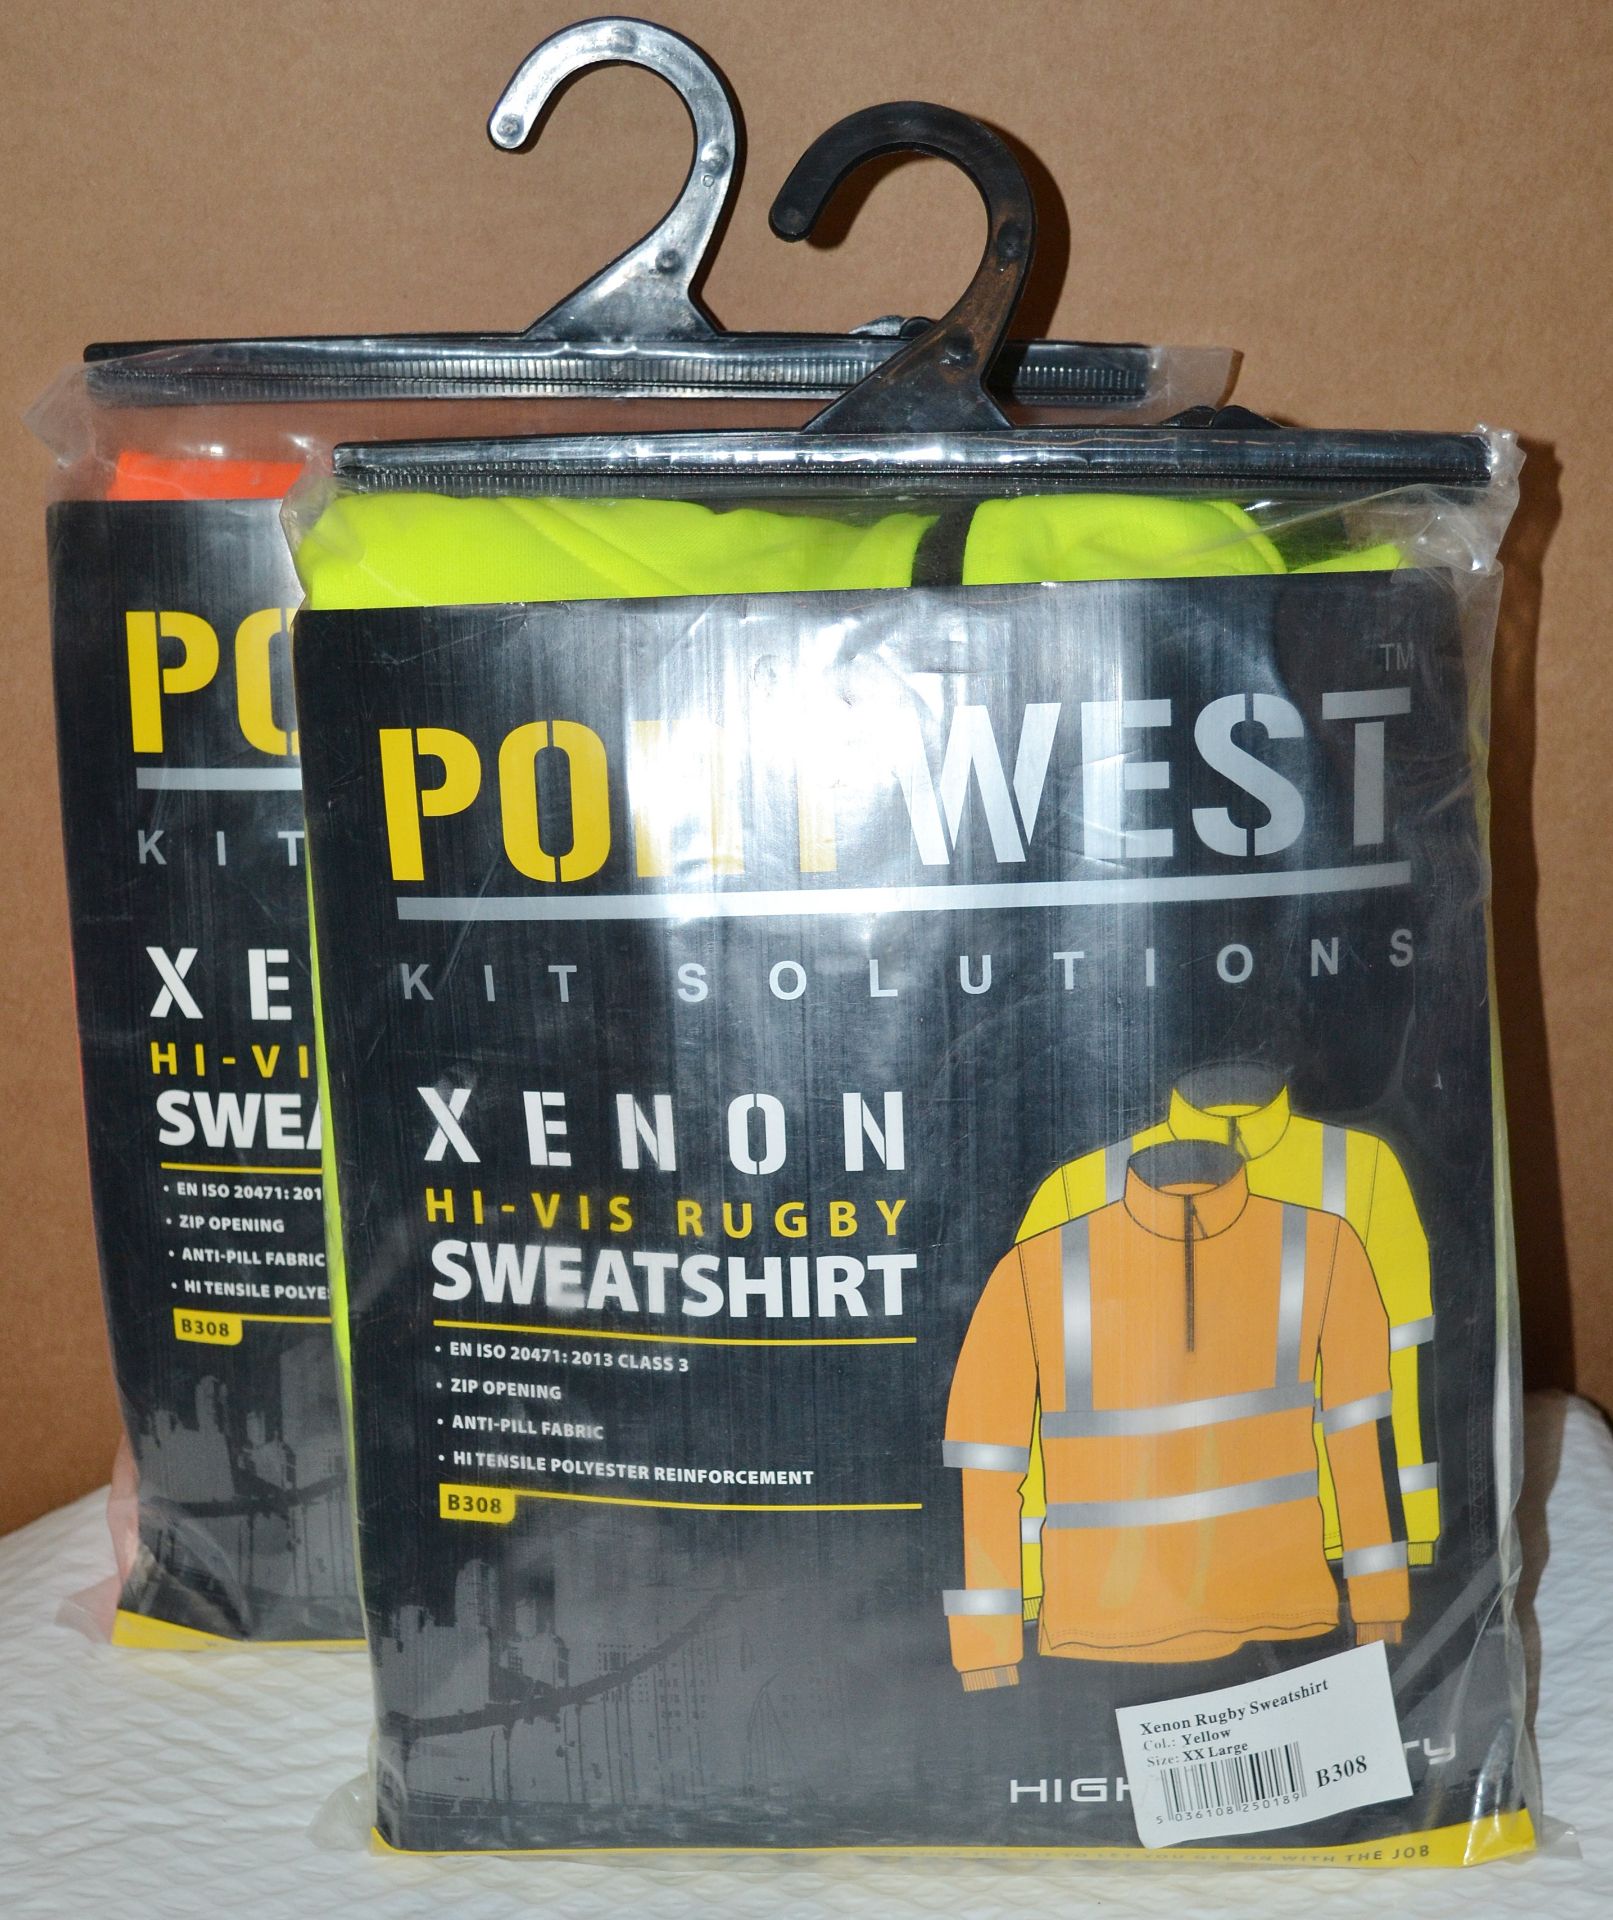 2 x Portwest Xenon Rugby Shirt Sweatshirt Workwear Hi Vis Visibility (B308) - Colour: Yellow / - Image 2 of 2